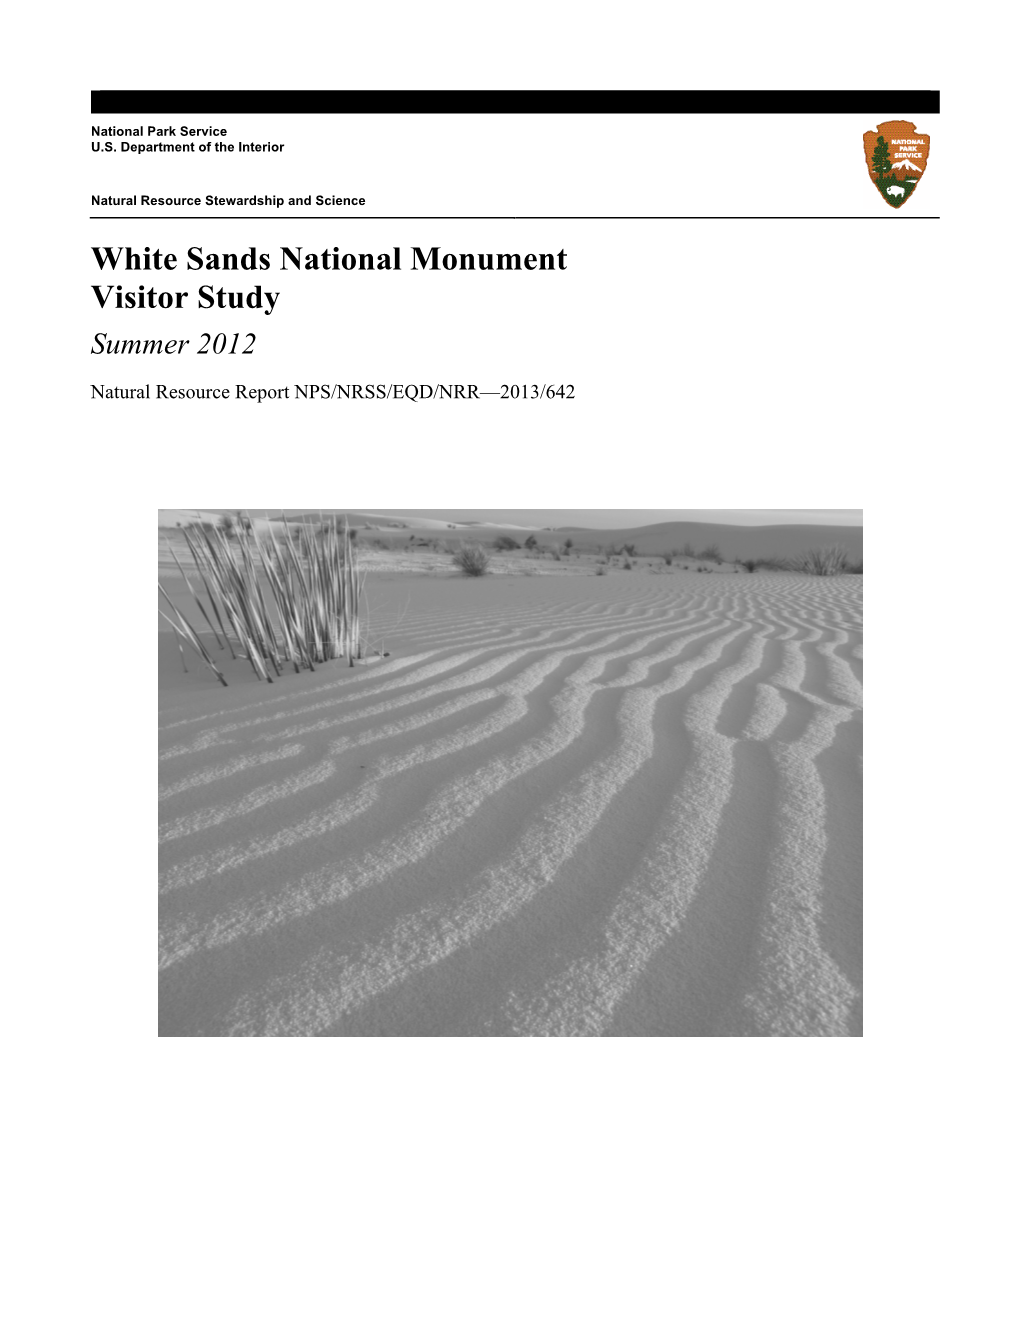 White Sands National Monument Visitor Study Summer 2012